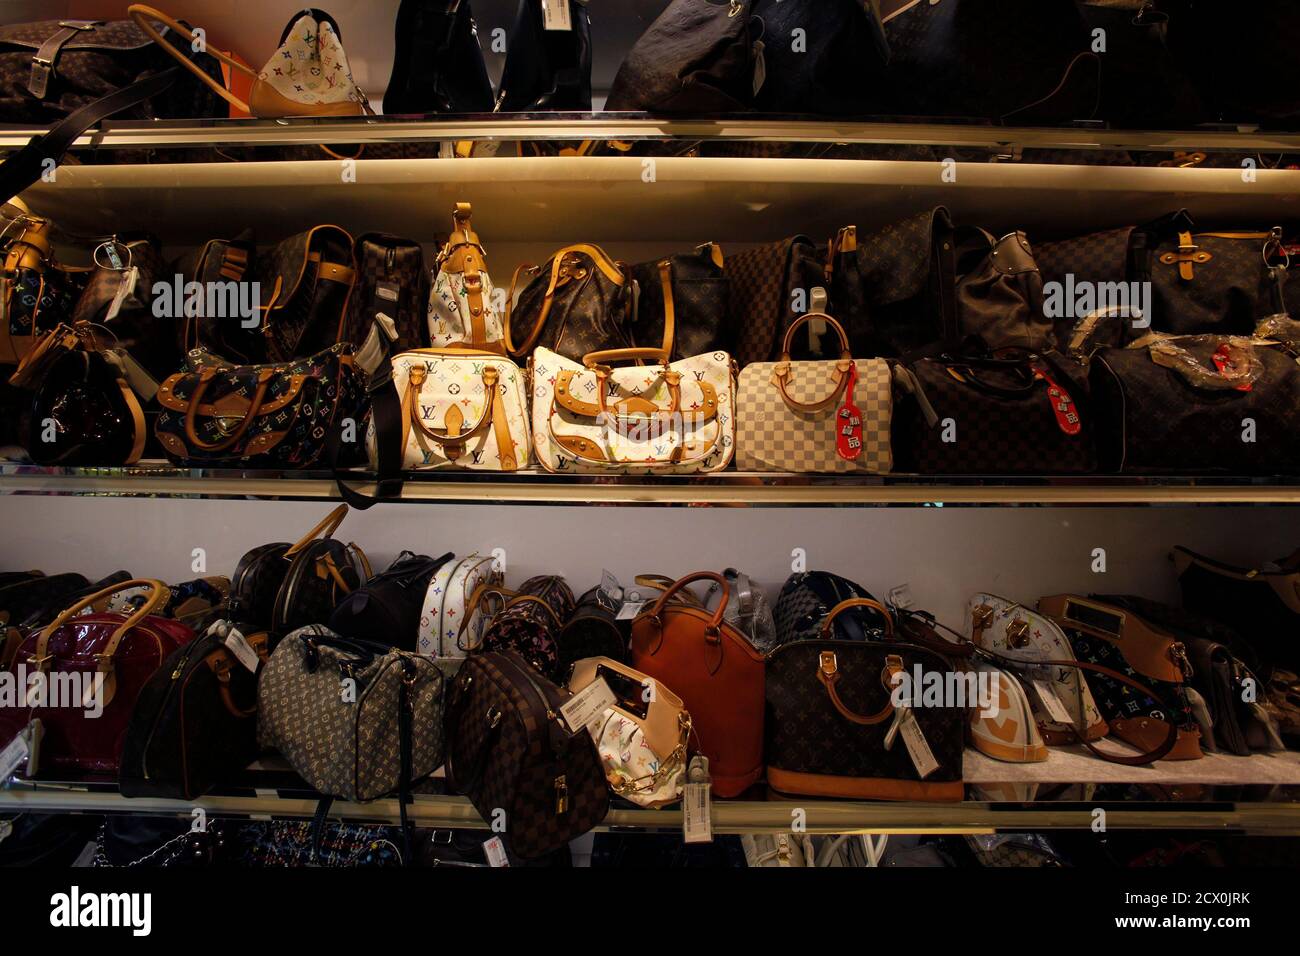 Second-hand luxury handbags are displayed a Milan Station outlet in Hong Kong September 2, 2013. In designer-obsessed Hong Kong, keeping up appearances can be hard on the pocketbook. One company has